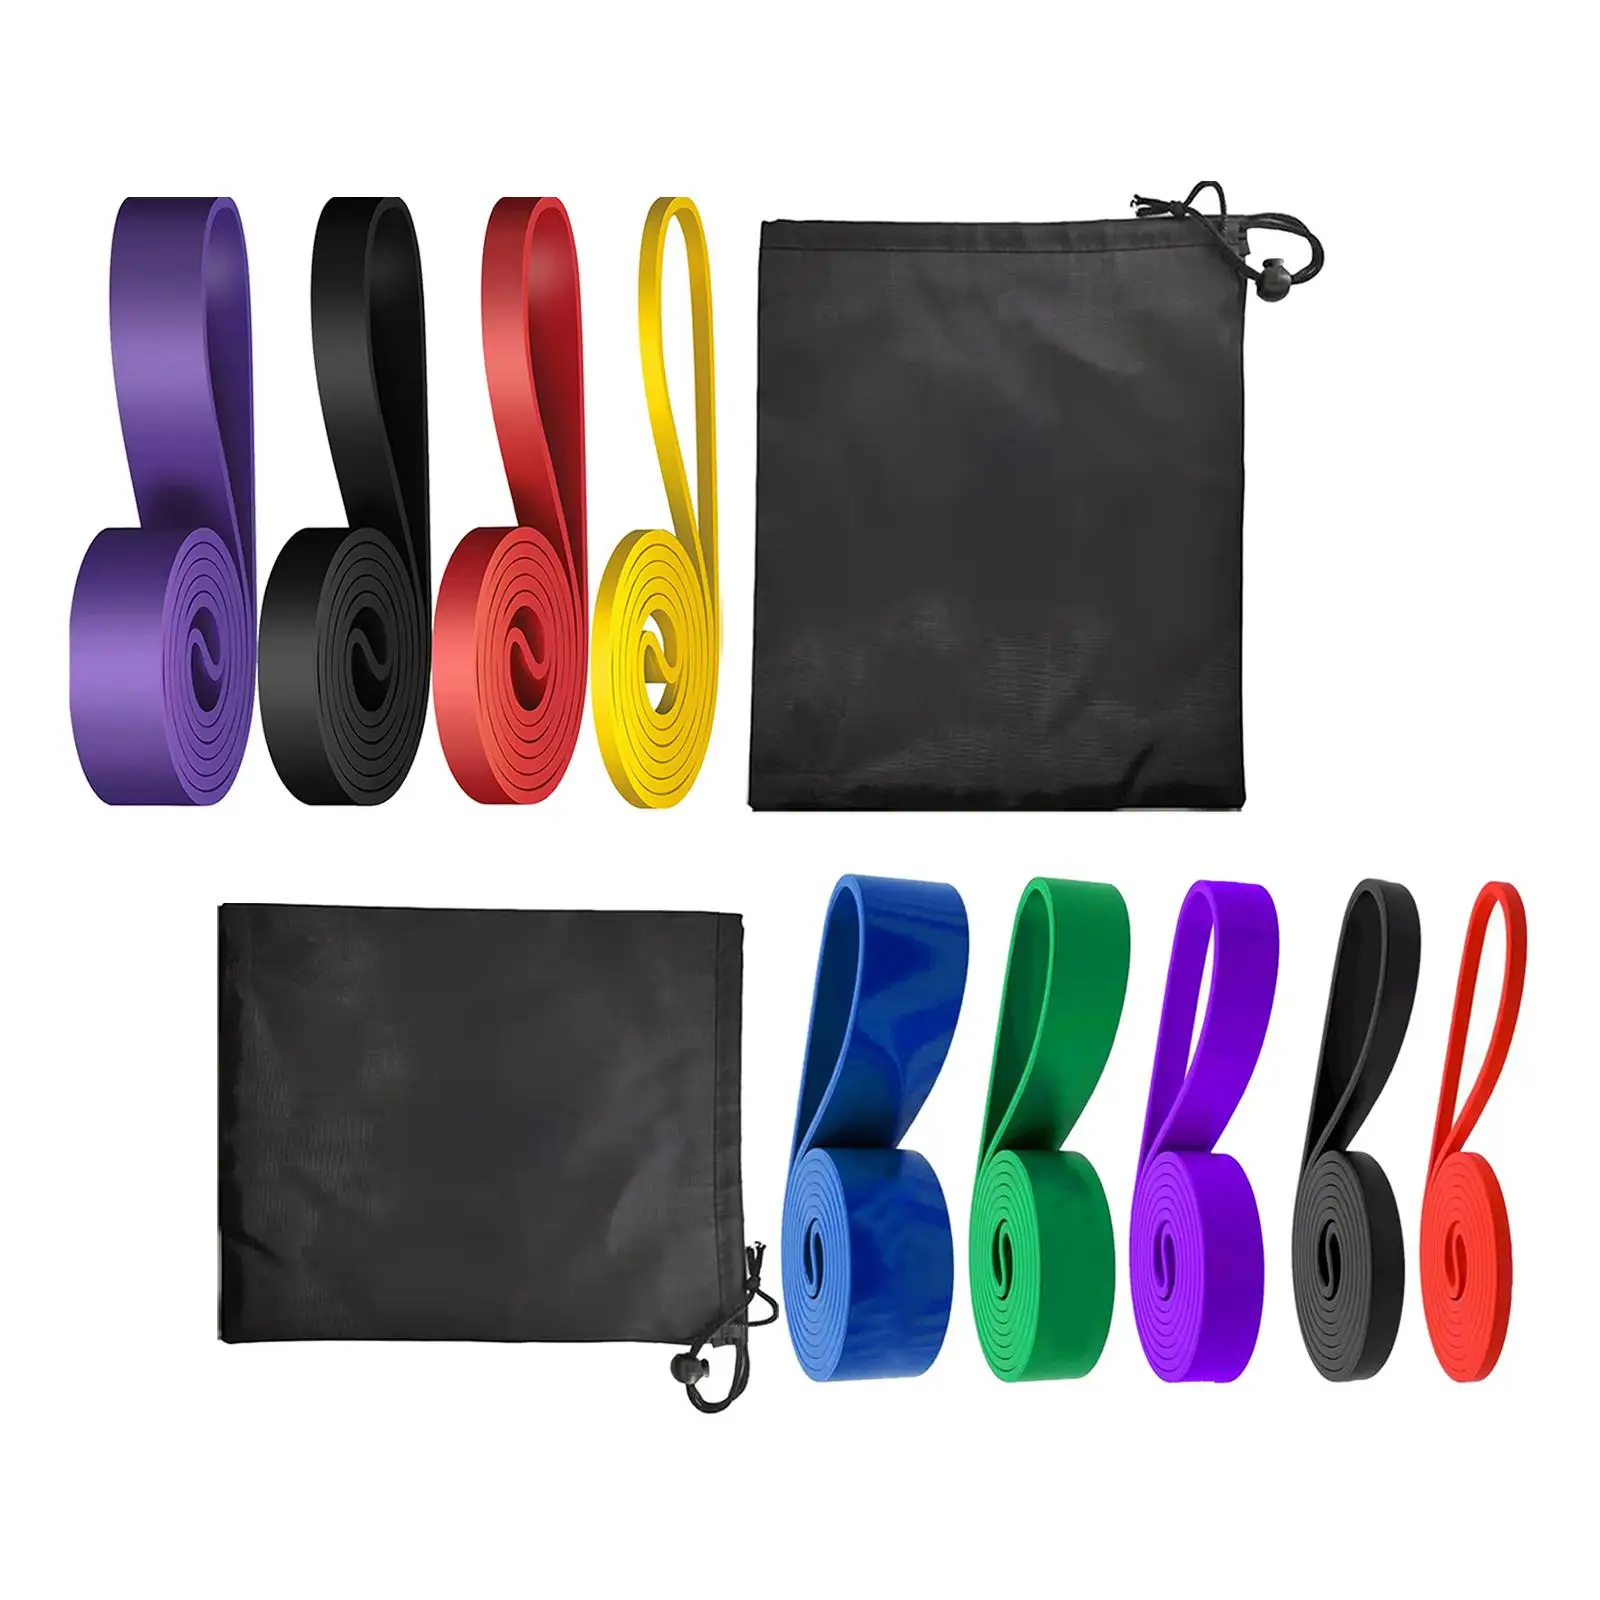 Resistance Bands Men Women Pull up Assist Bands Full Body Training Workout Loop Band with Storage Bag for Yoga Workout Pilates